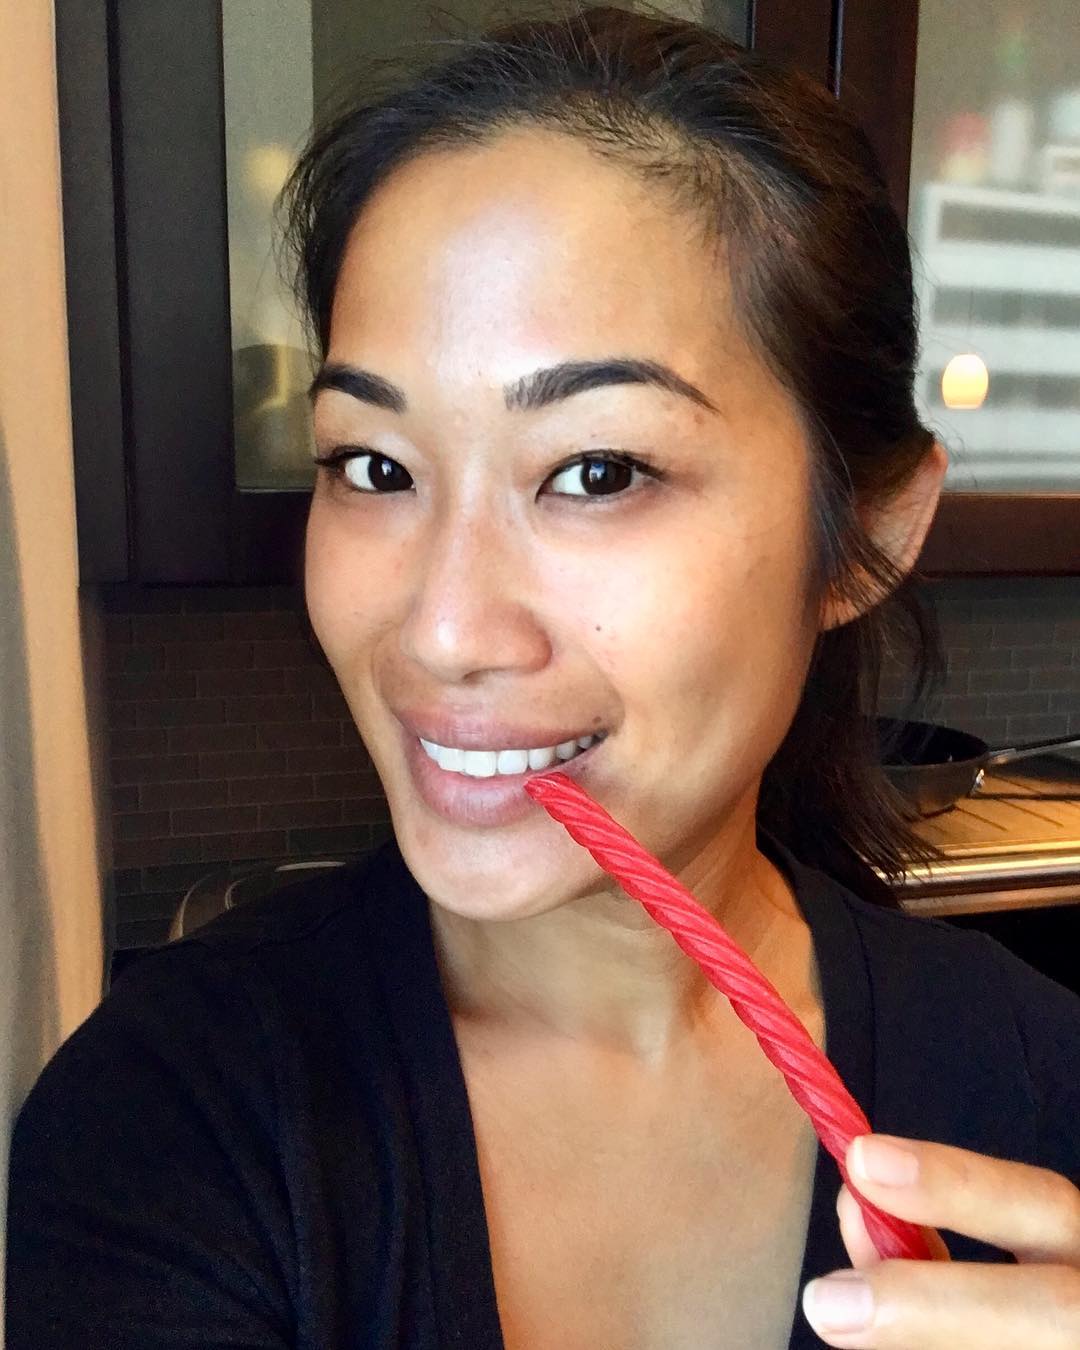 51 Hot Pictures Of Lena Yada Are Here To Fill Your Heart With Joy And Happiness 27